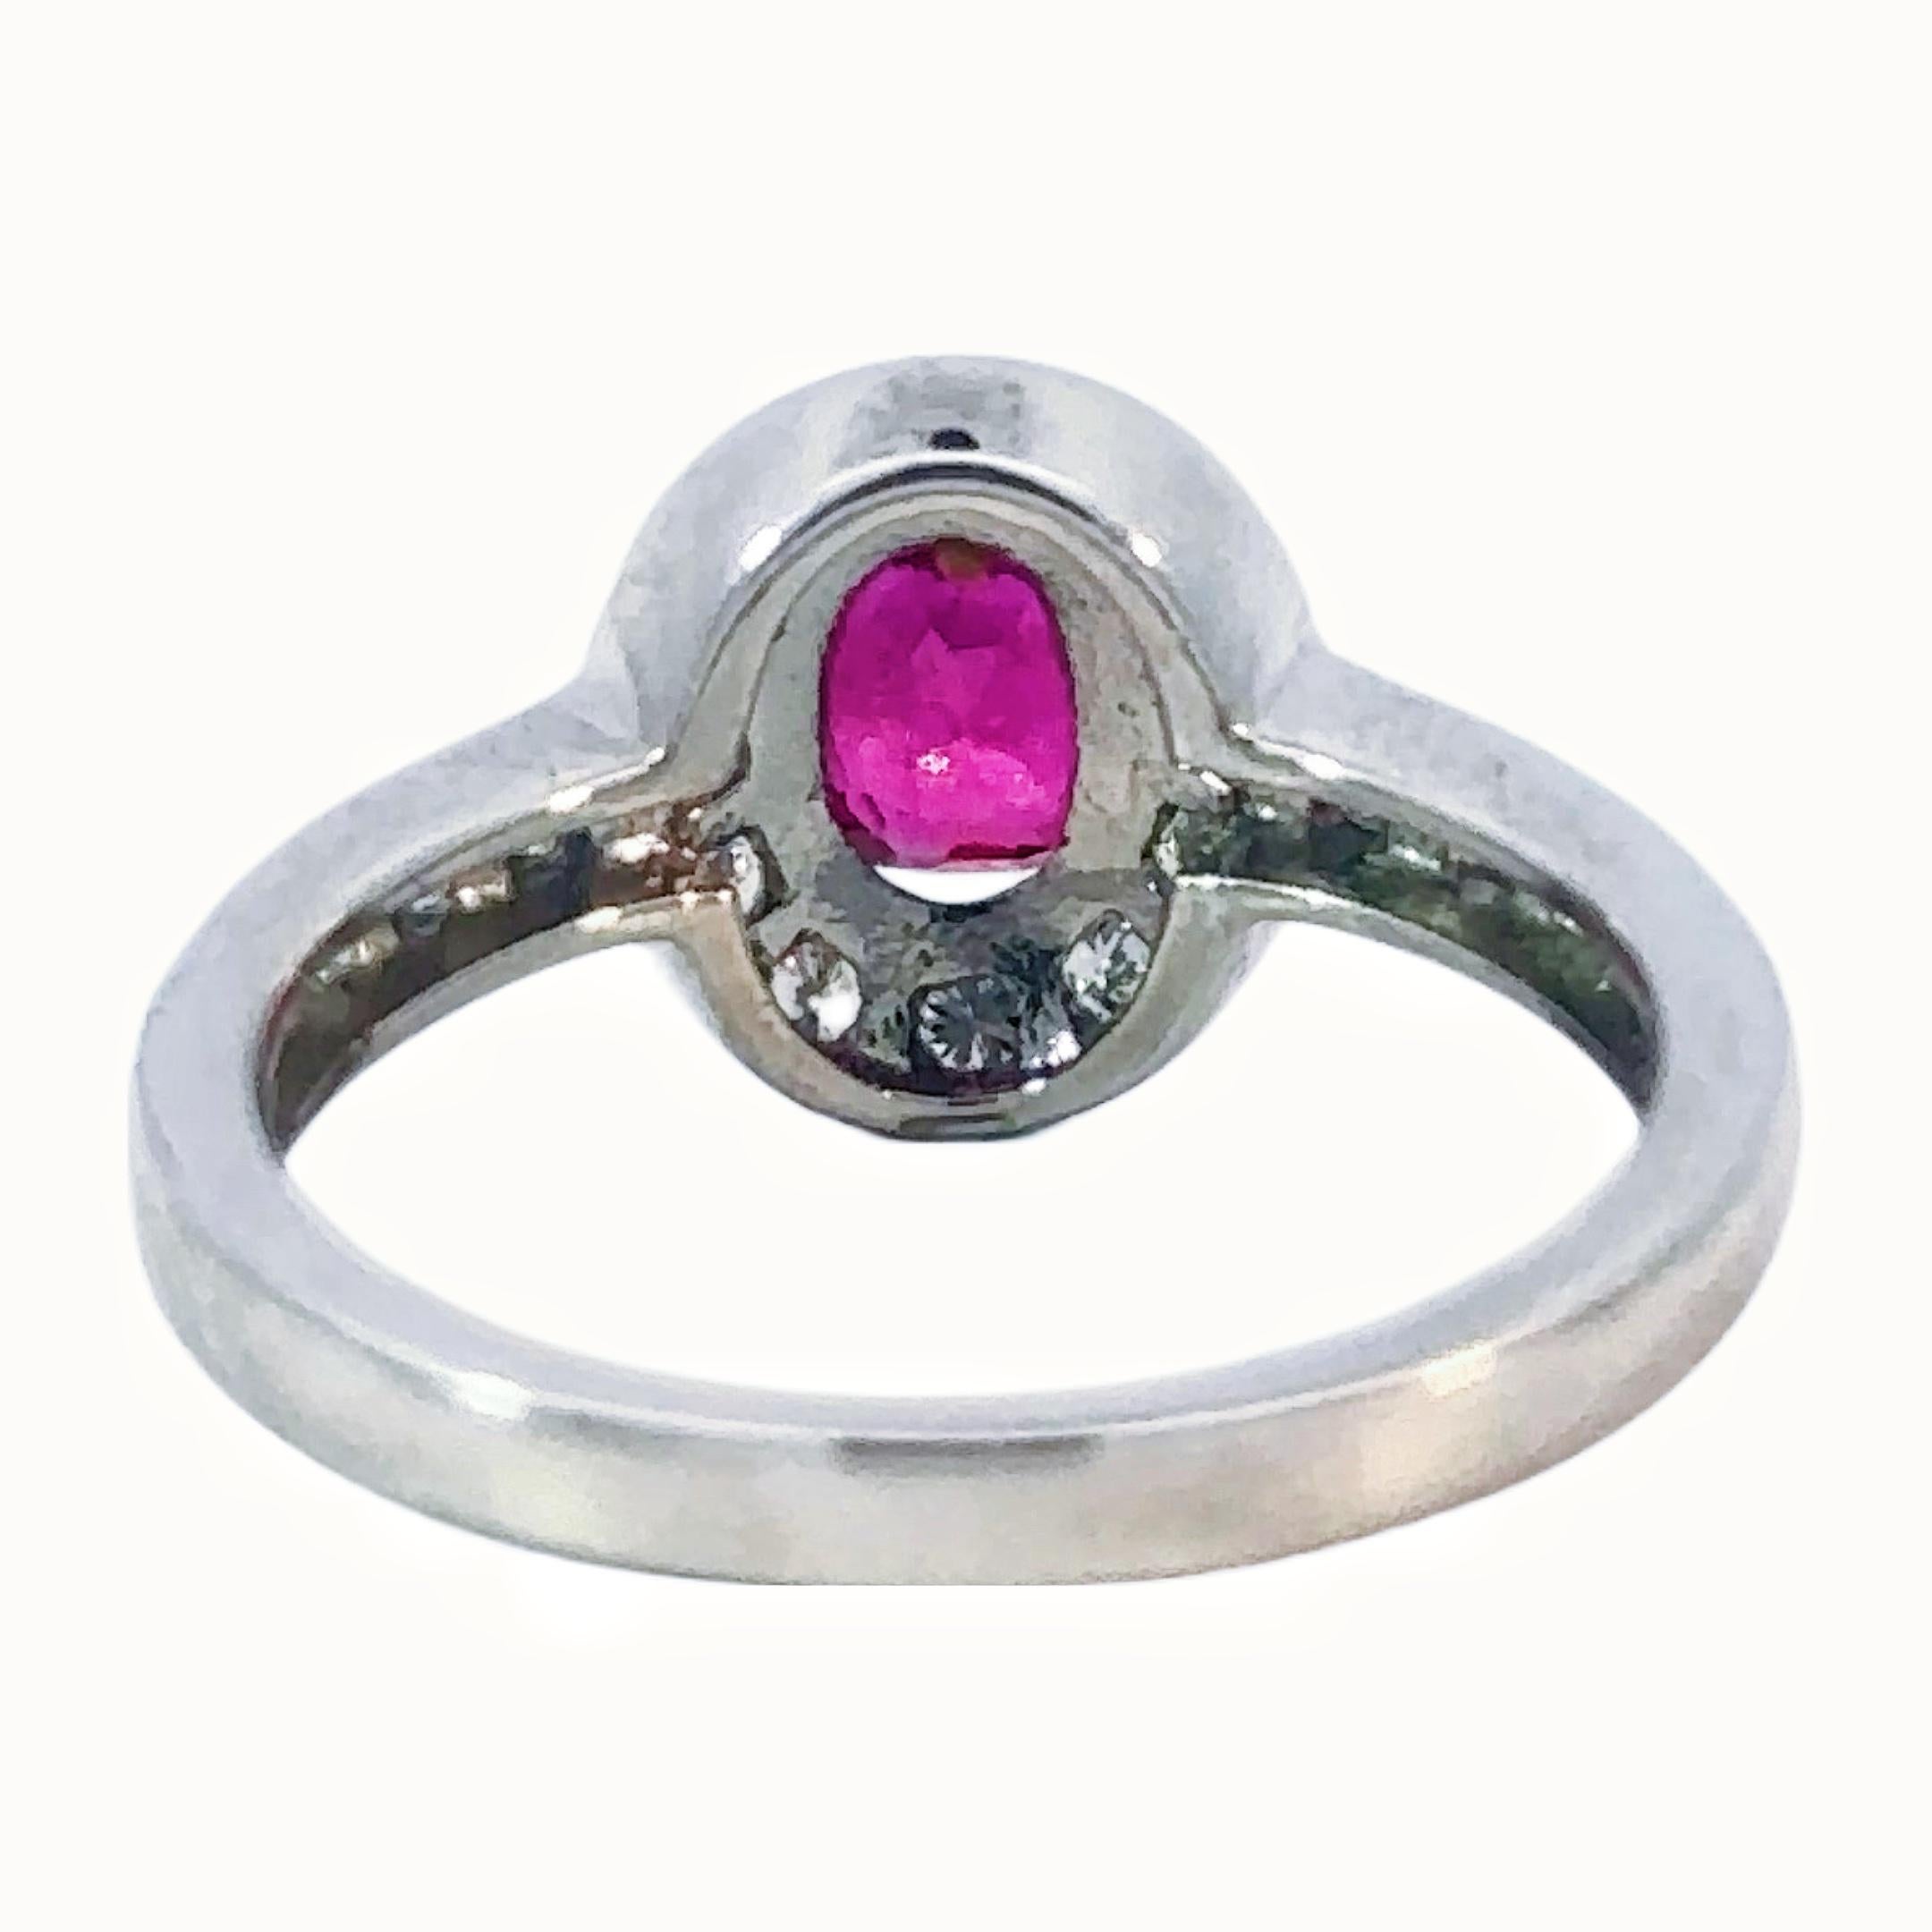 GCS Certified 1.08 Carats Unheated Burma Ruby Diamond Ring

Come with a GCS lab report.

A desirable cushion cut ruby, set in 18k white gold, contrasted by a supporting row of brilliant cut diamonds to give an extra sparkle. Whether given as an